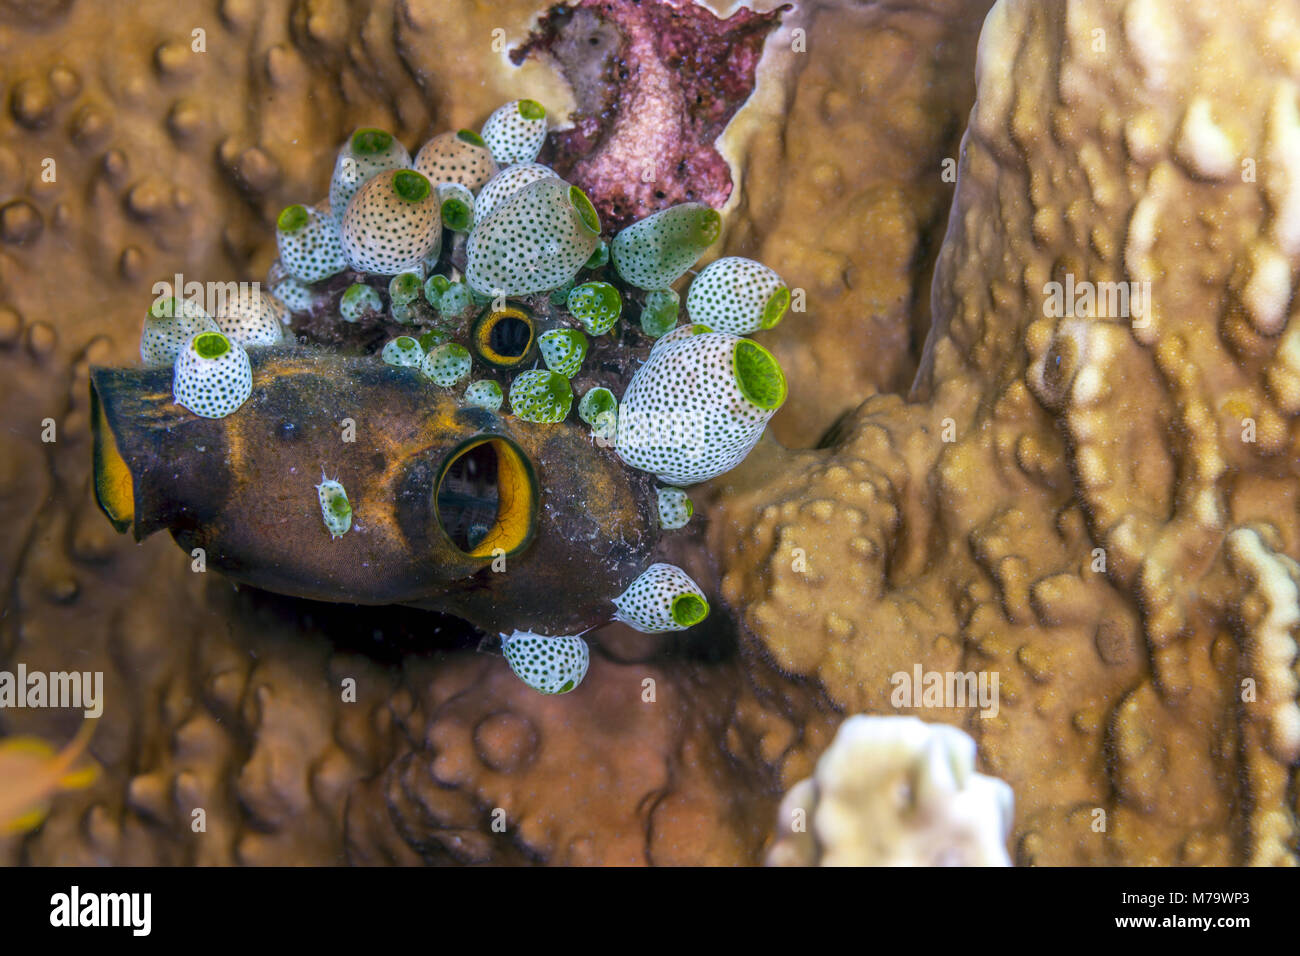 Didemnum molle is a species of colonial tunicate in the family Didemnidae. Stock Photo